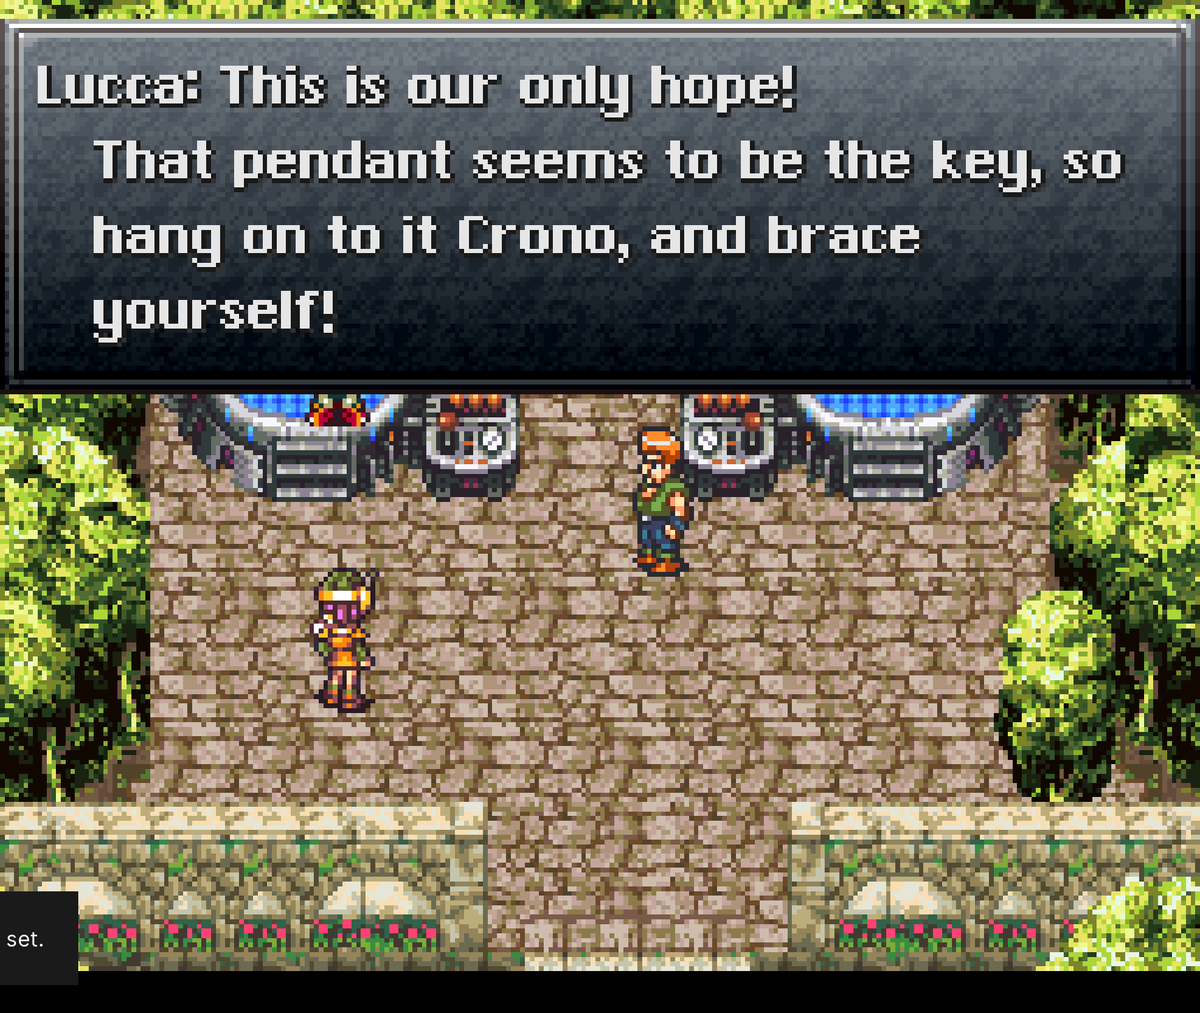 God I love chrono trigger. I still remember where I was when I played it the first time - on vacation because my jerk parents bought it for me but didn't let me play it for 2 months so they could ditch me in the hotel room and it worked.

I'm playing with a romhack btw (CT+ )